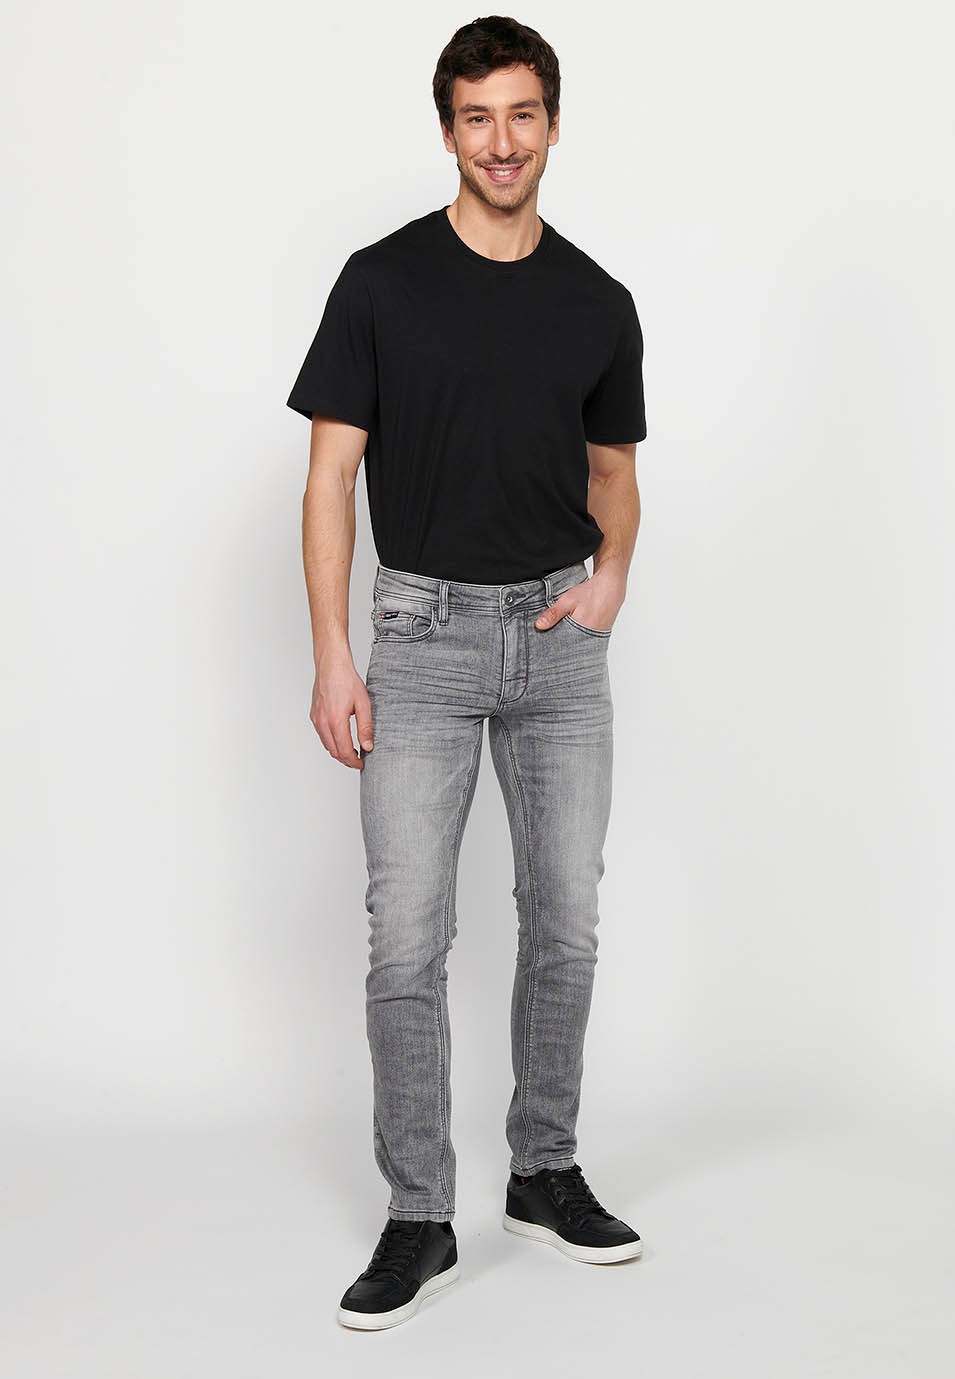 Slim fit denim jeans long trousers with five pockets, one pocket in Gray Denim for Men